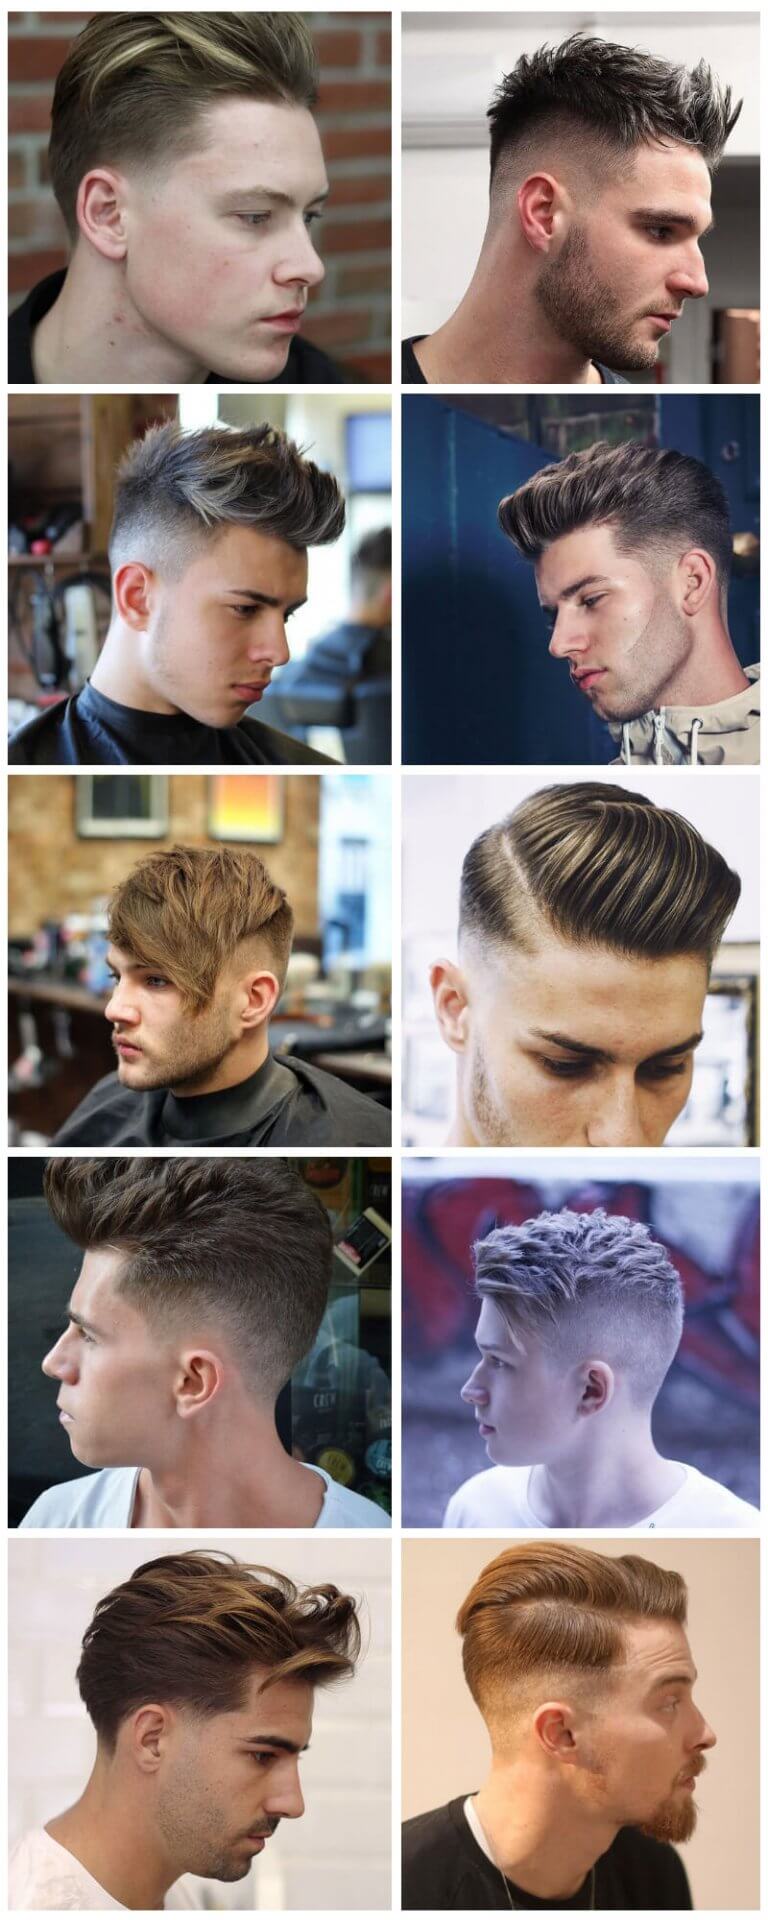 Top Haircut Trends for 2018 You Can Create with Hair Clippers